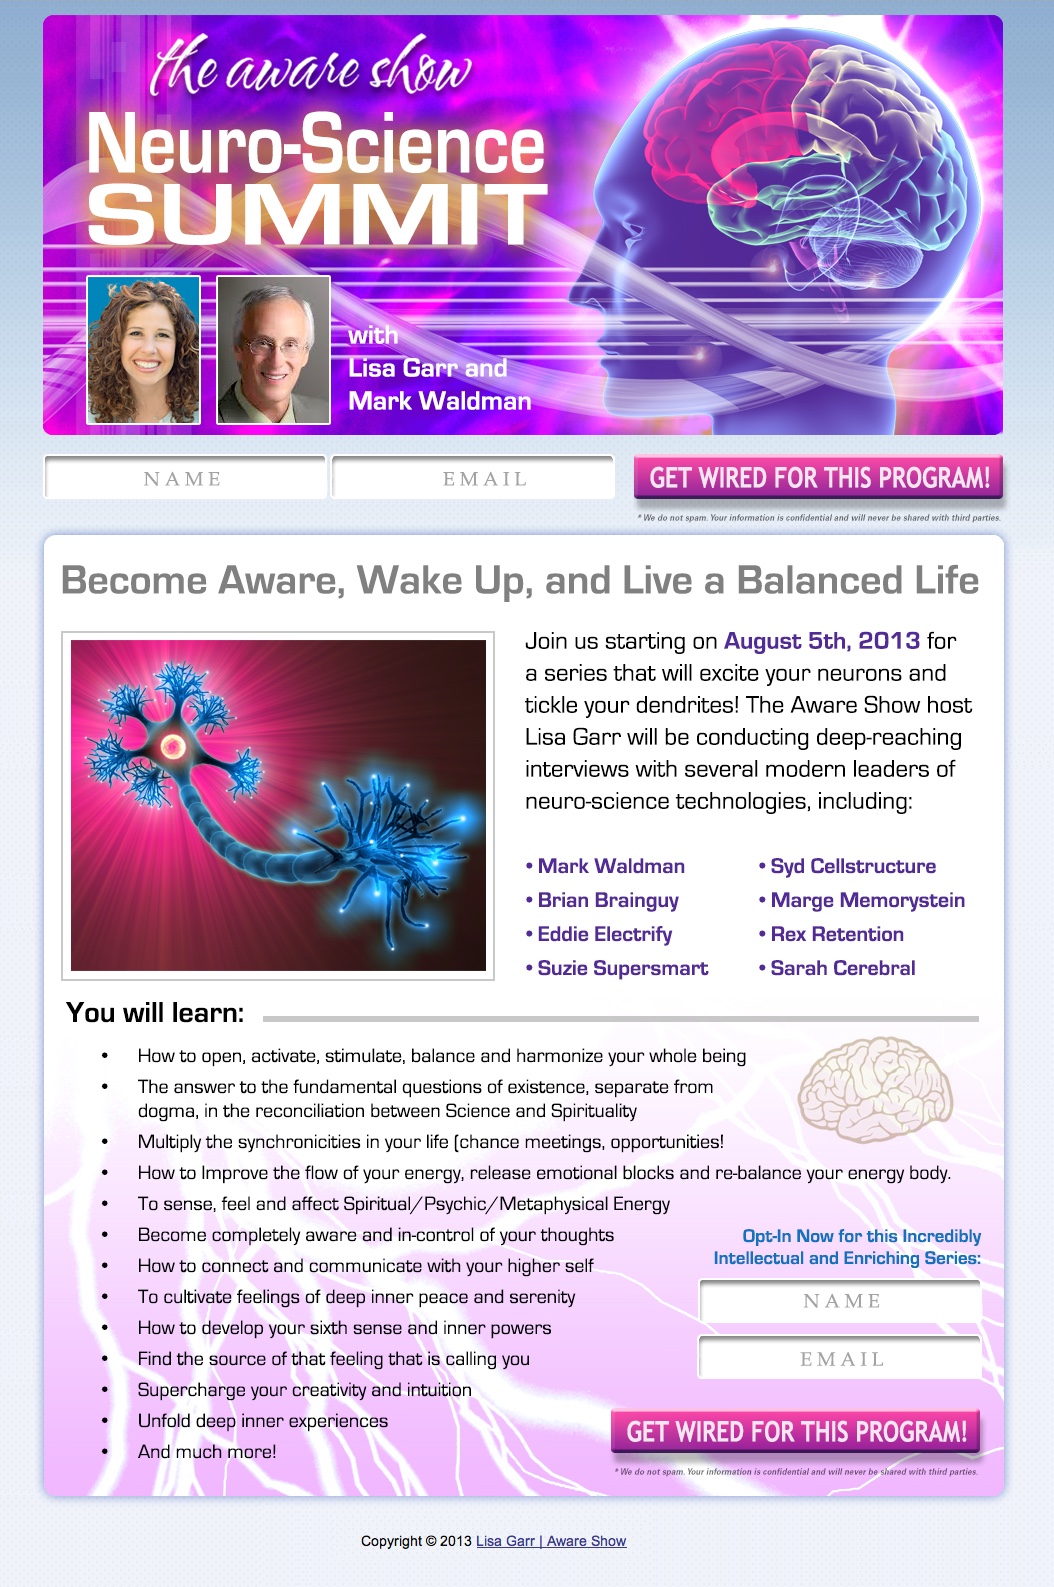 The Aware Show NeuroSummit I Squeeze Page